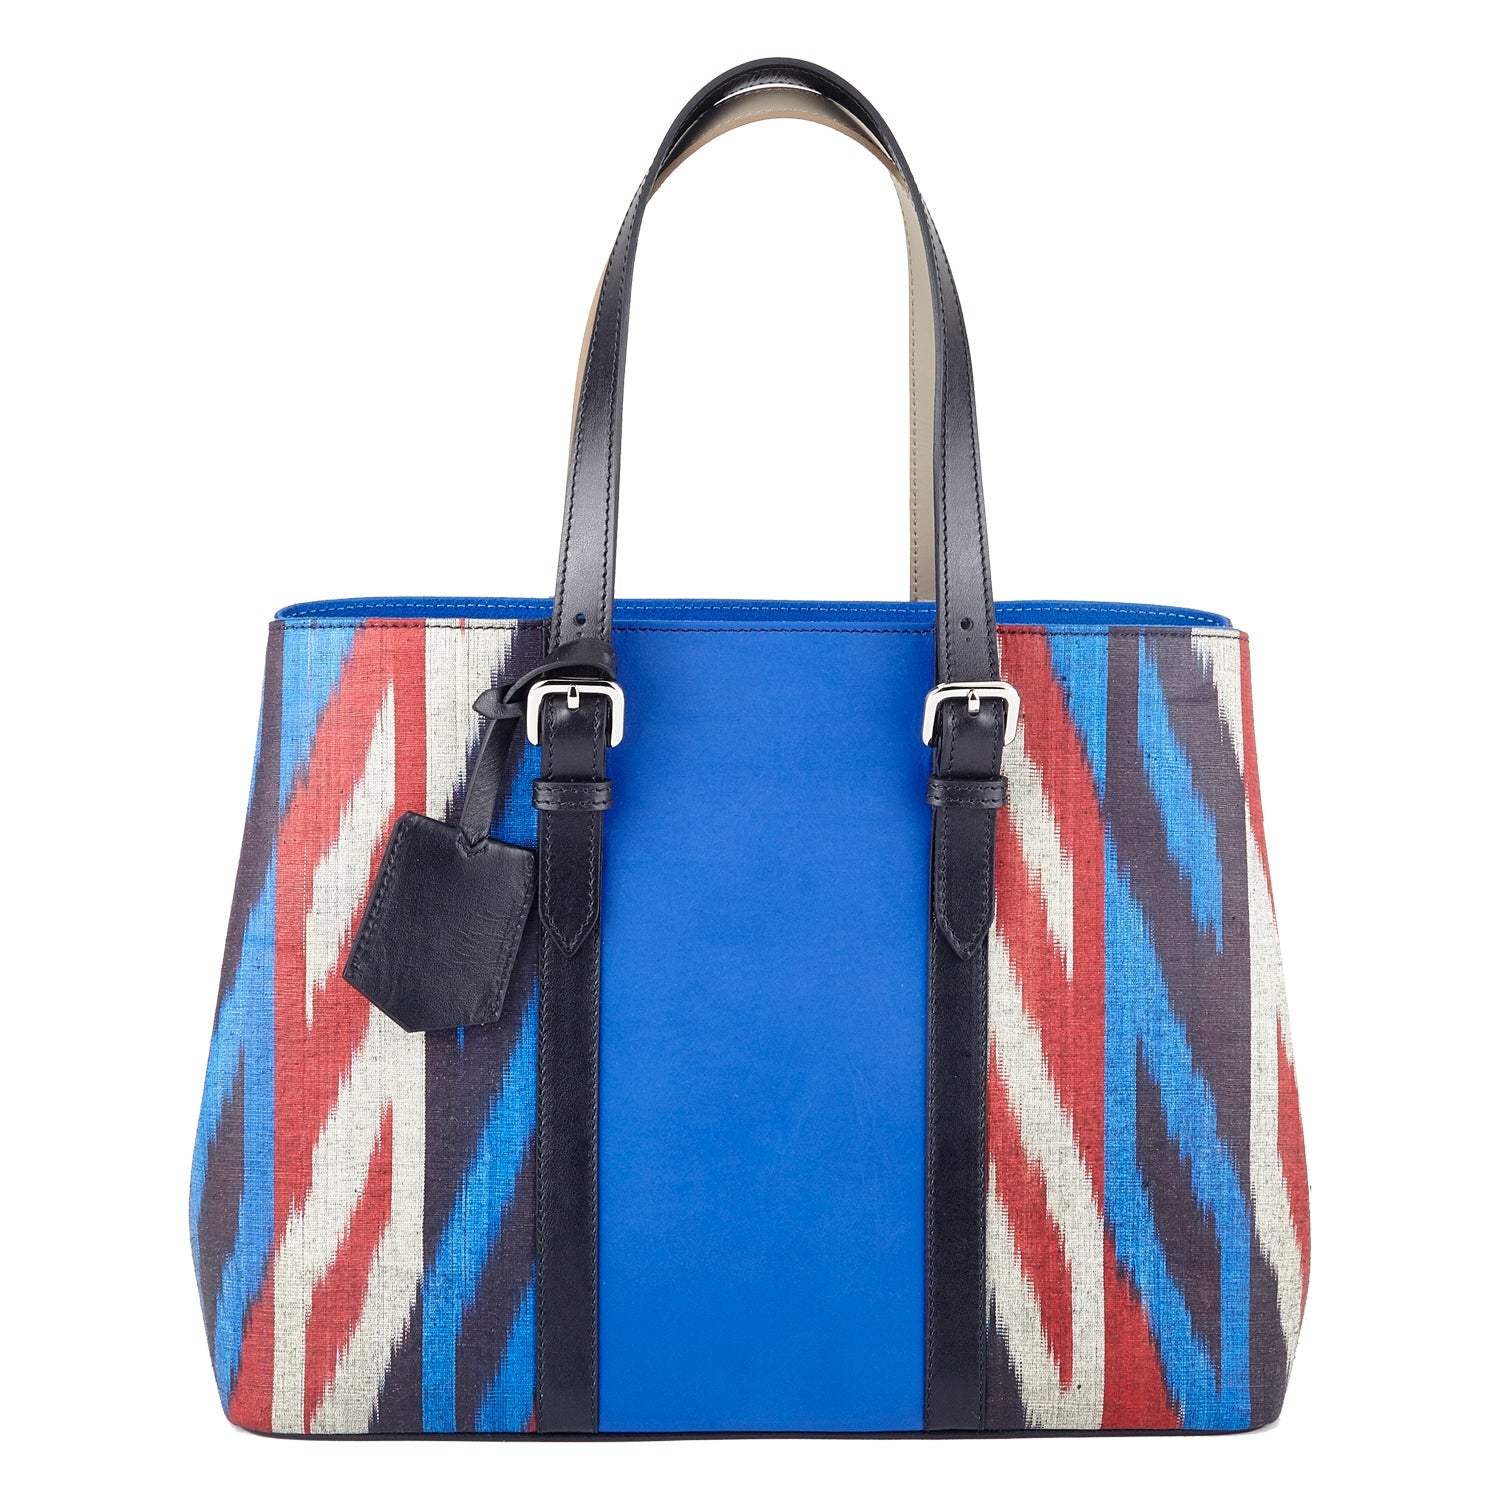 Lord's Sustainable Ikat Tote Bag with Leather Shoulder Straps - SJW BAGS LONDON